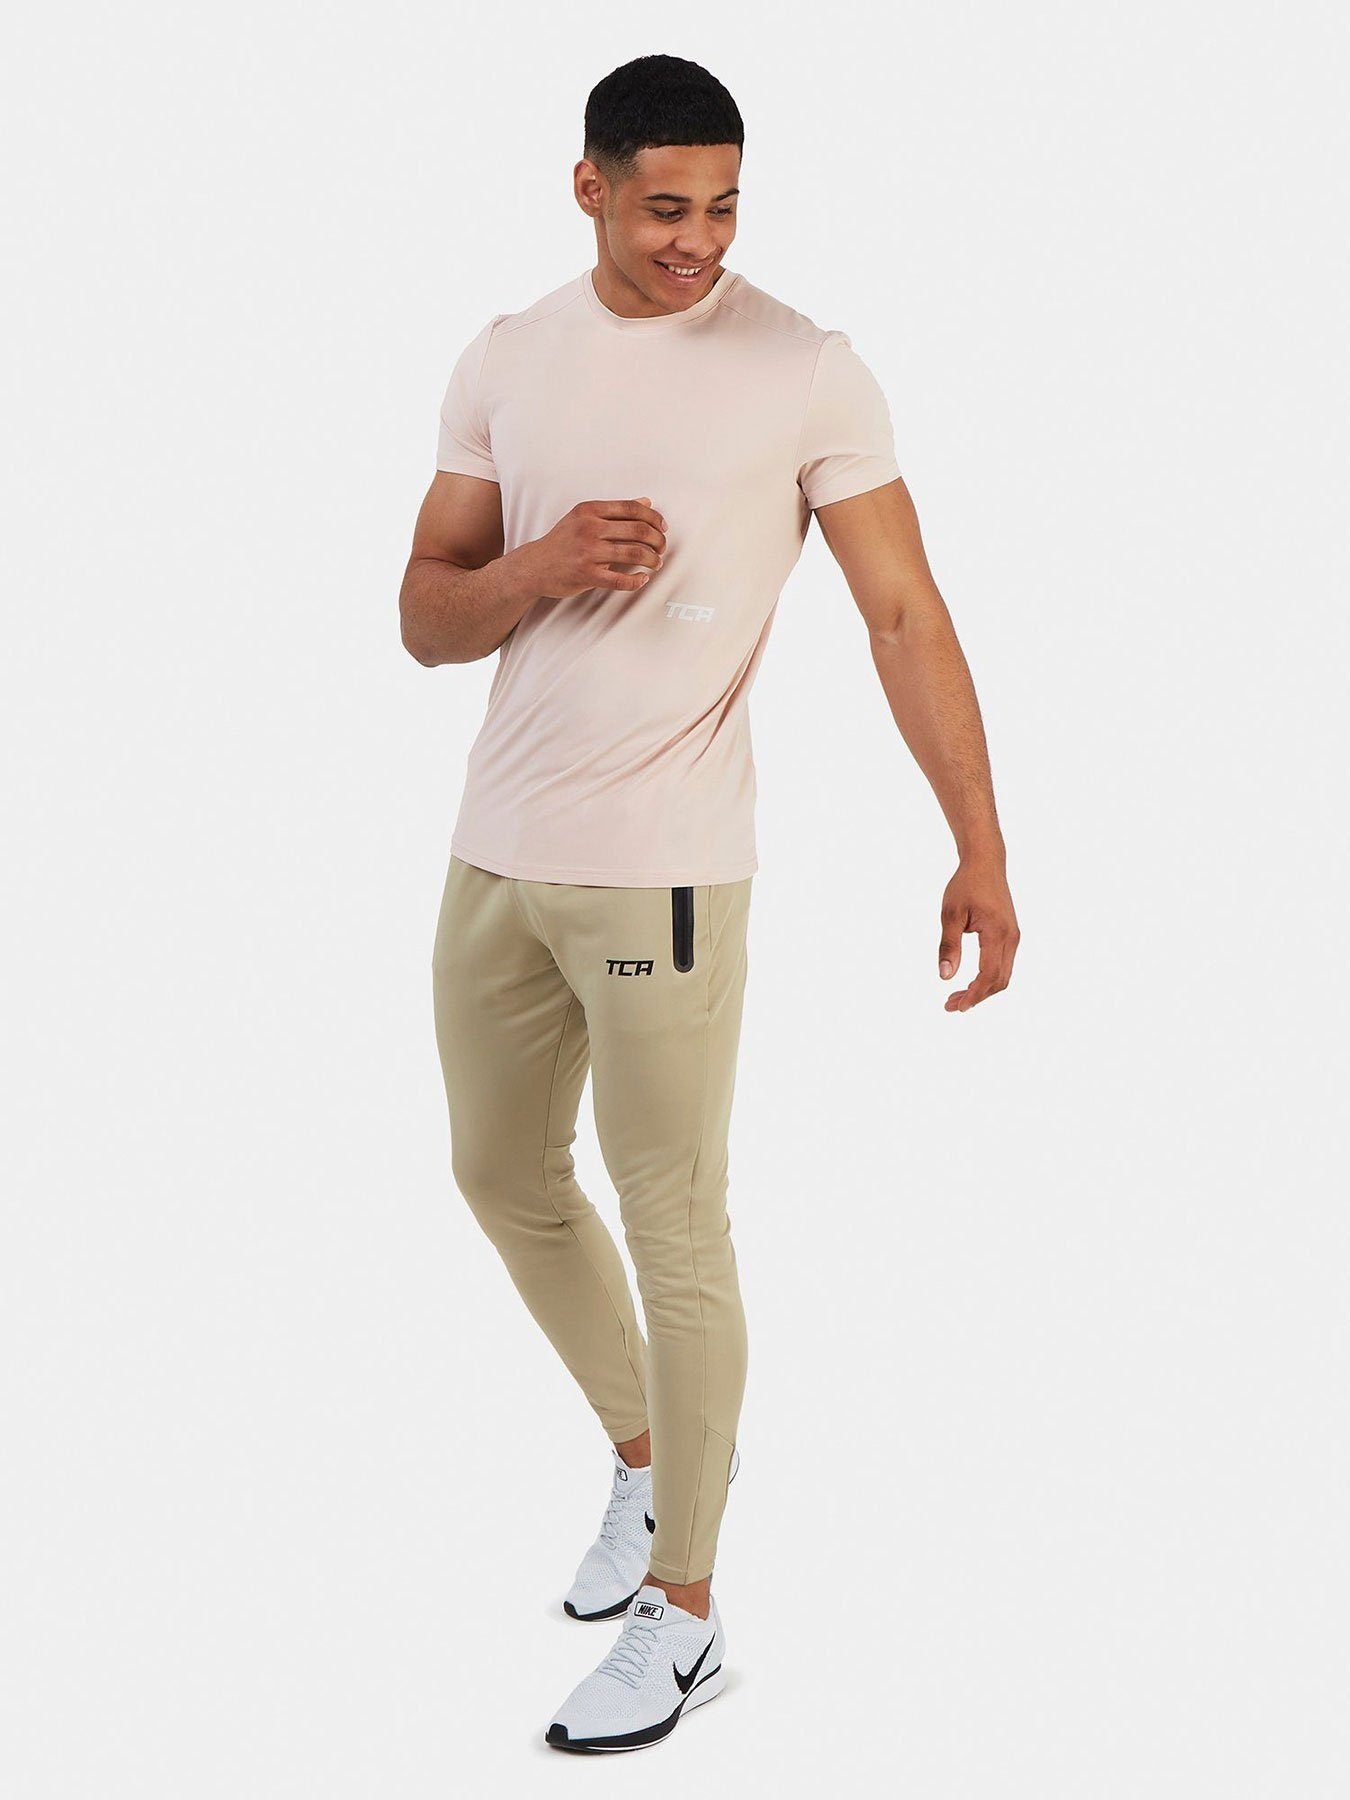 Multicolor Bottom Wear Mens Lower Track Pants With Zipper Pocket, Age: 22+,  Size: Free Size